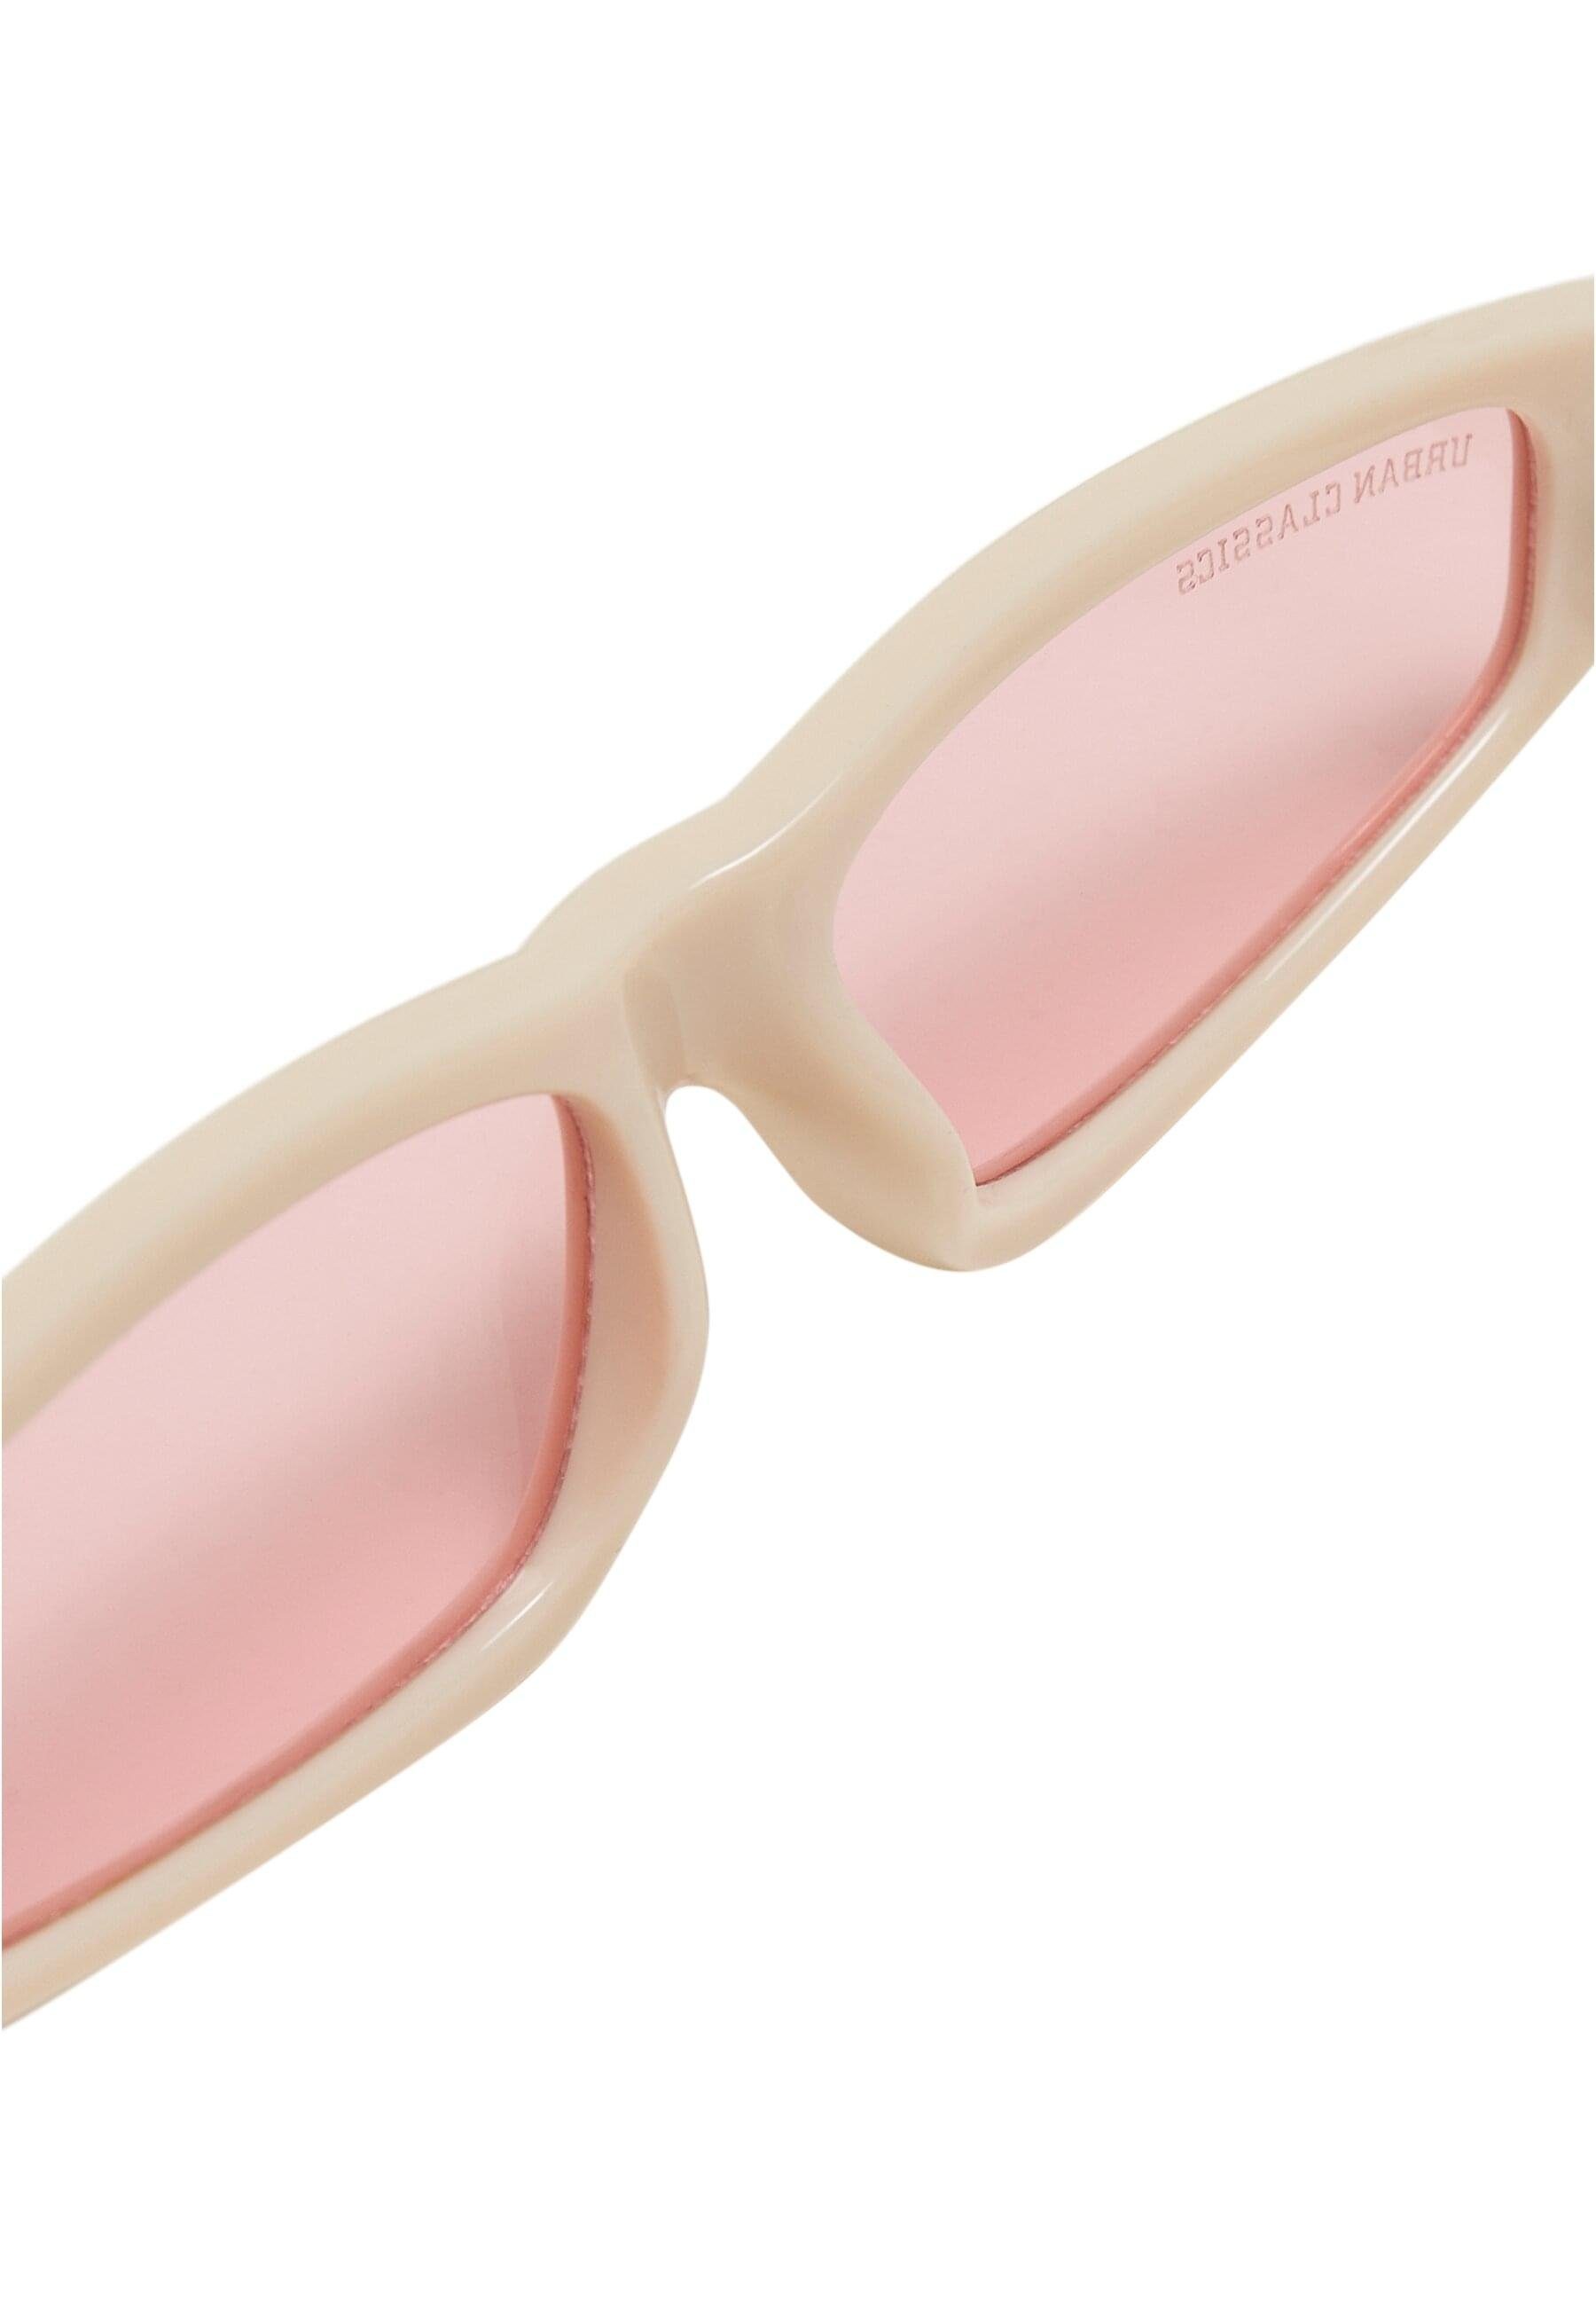 URBAN CLASSICS brown/brown+offwhite/pink Sonnenbrille 2-Pack Unisex Sunglasses Lefkada